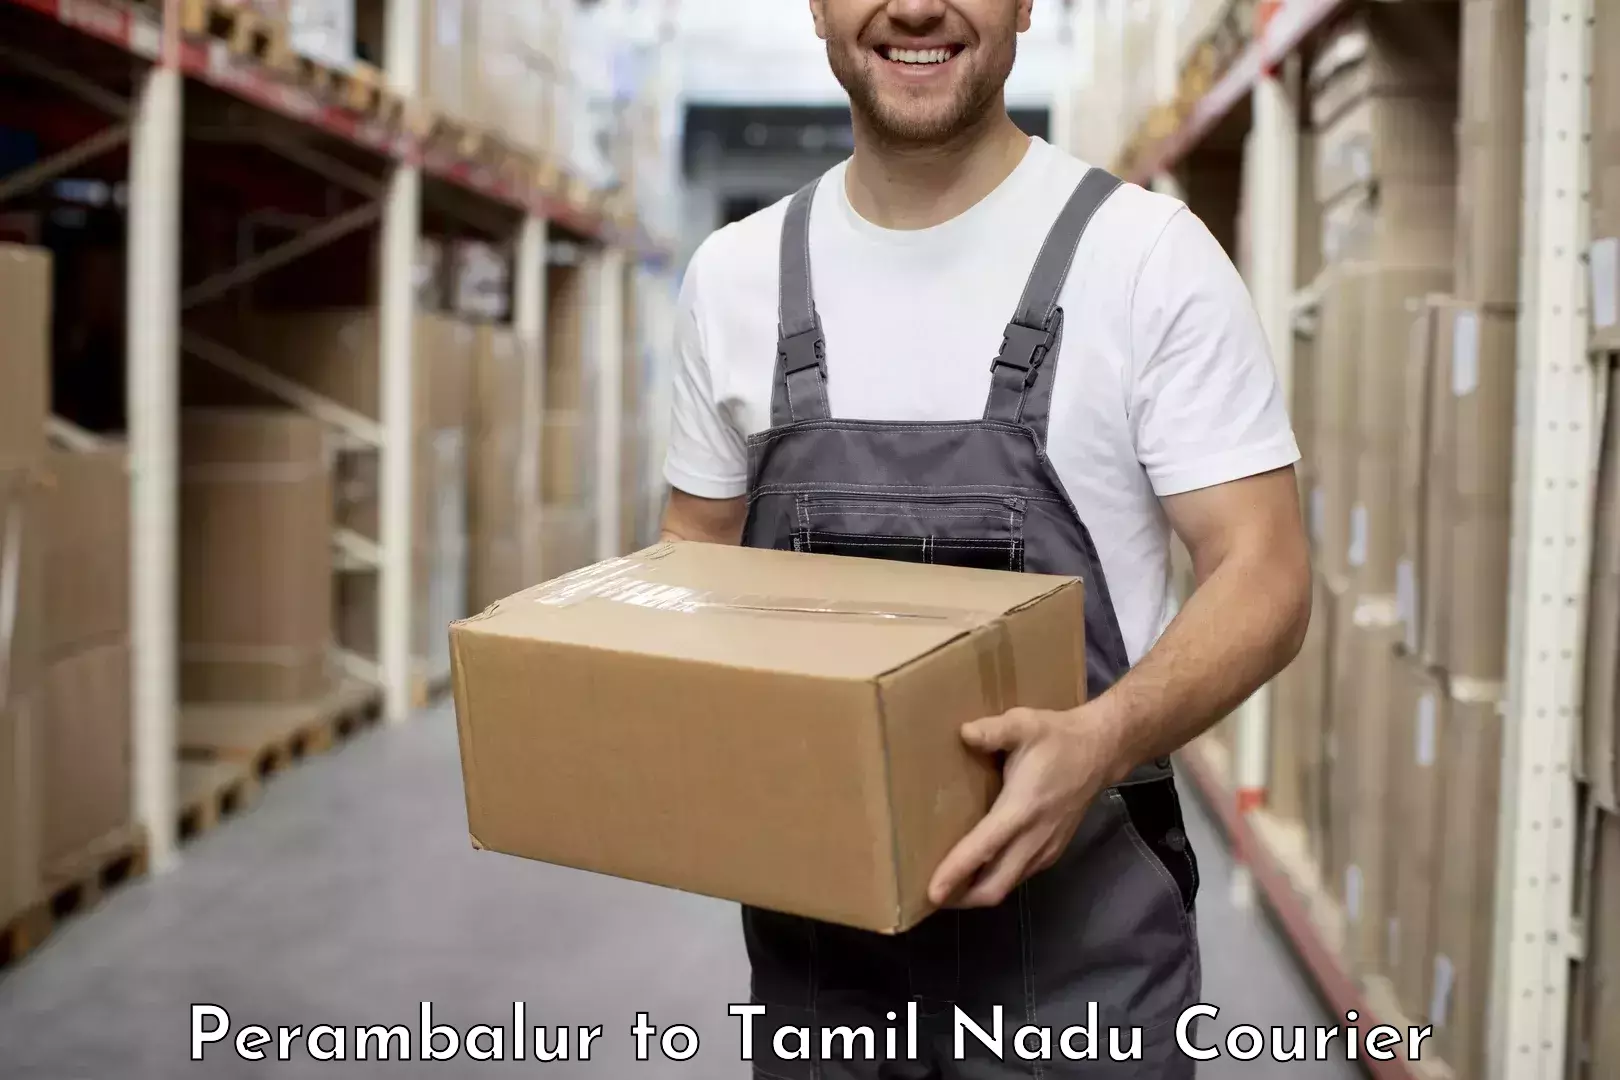 User-friendly delivery service Perambalur to Tiruppur